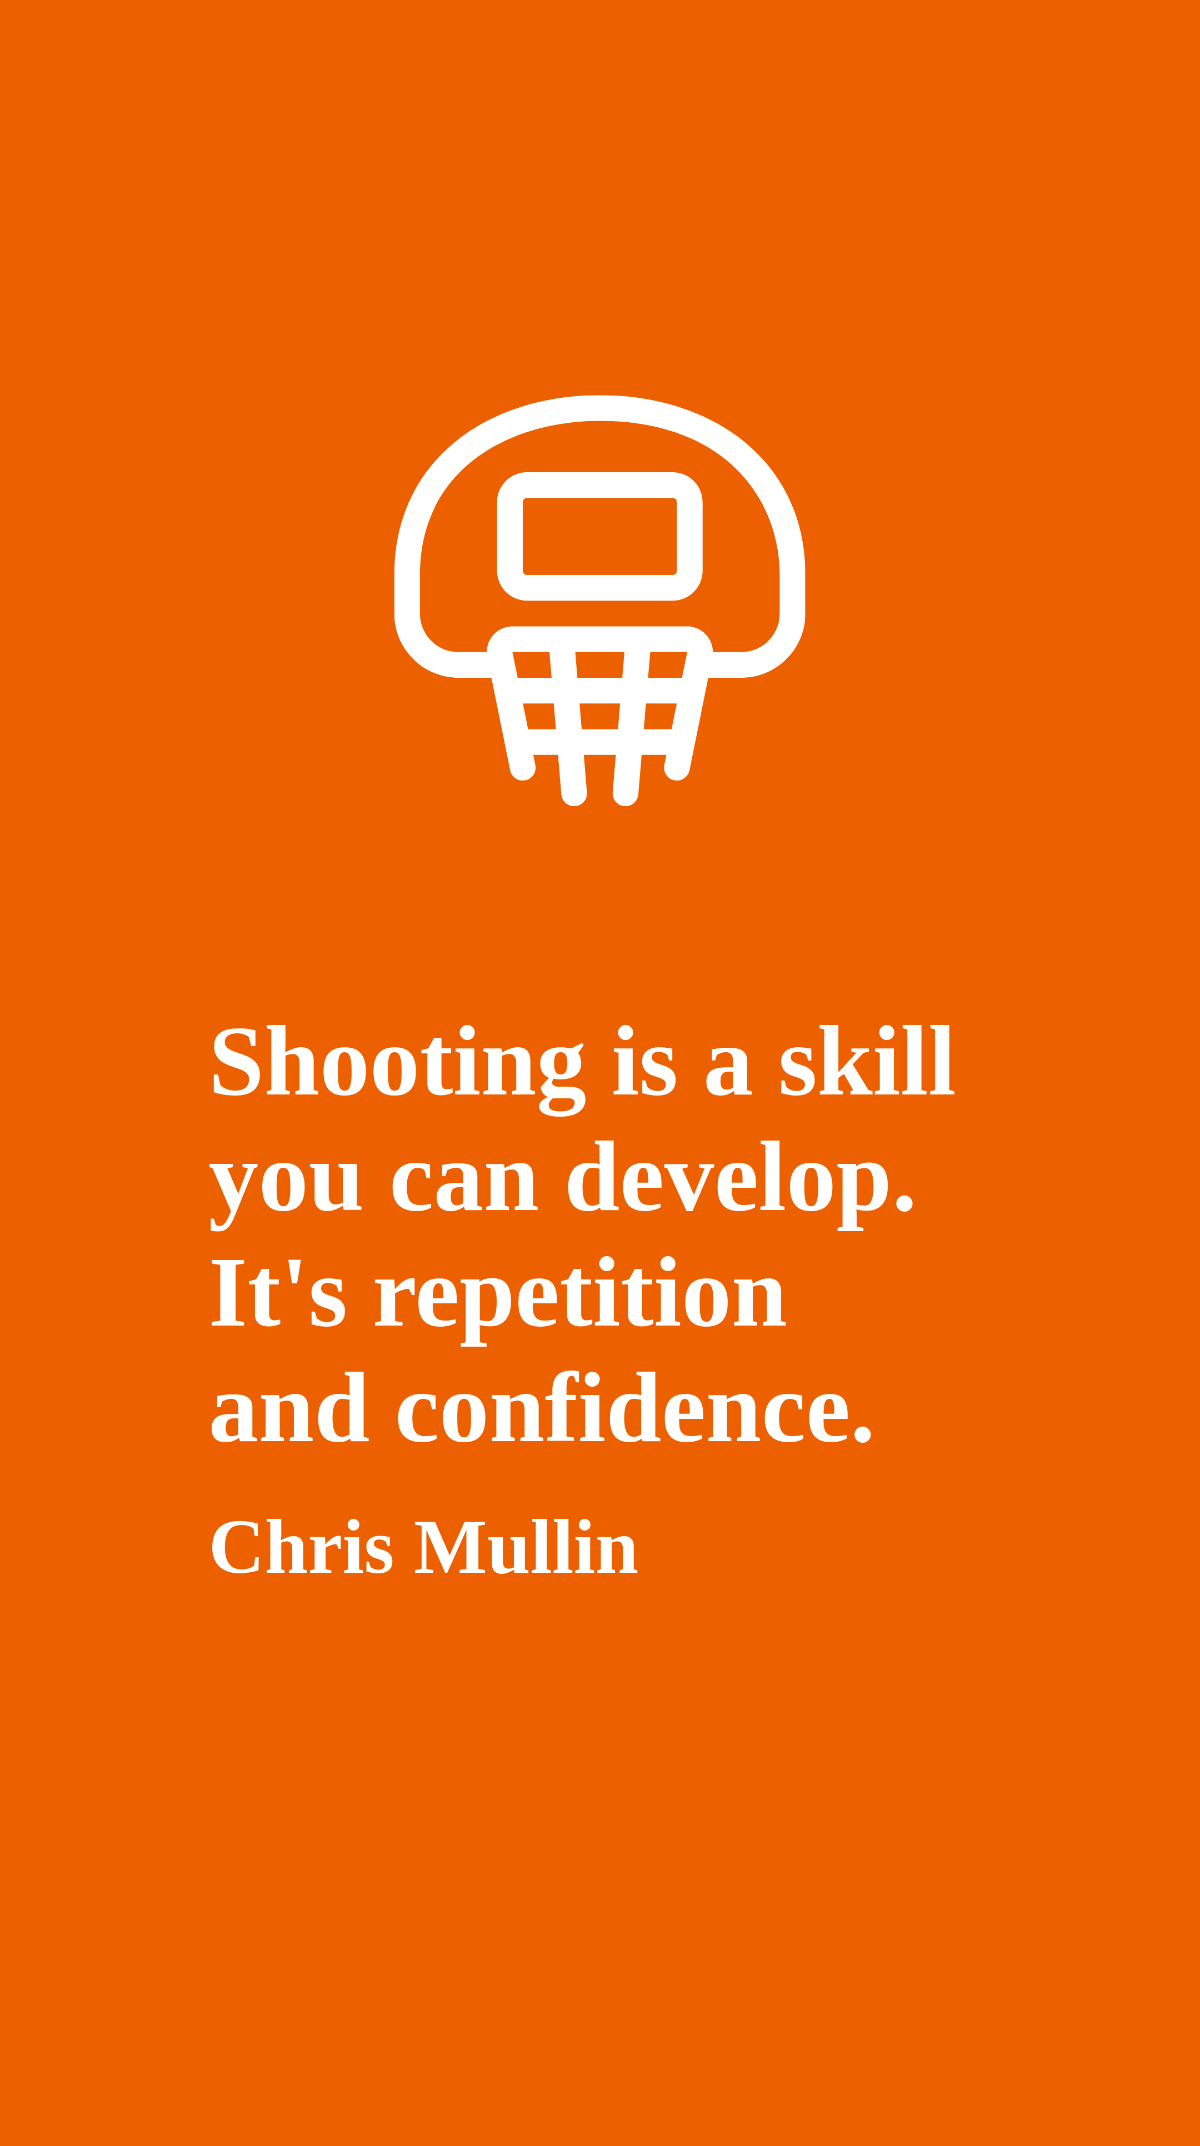 Free Chris Mullin - Shooting is a skill you can develop. It's repetition and confidence. Template